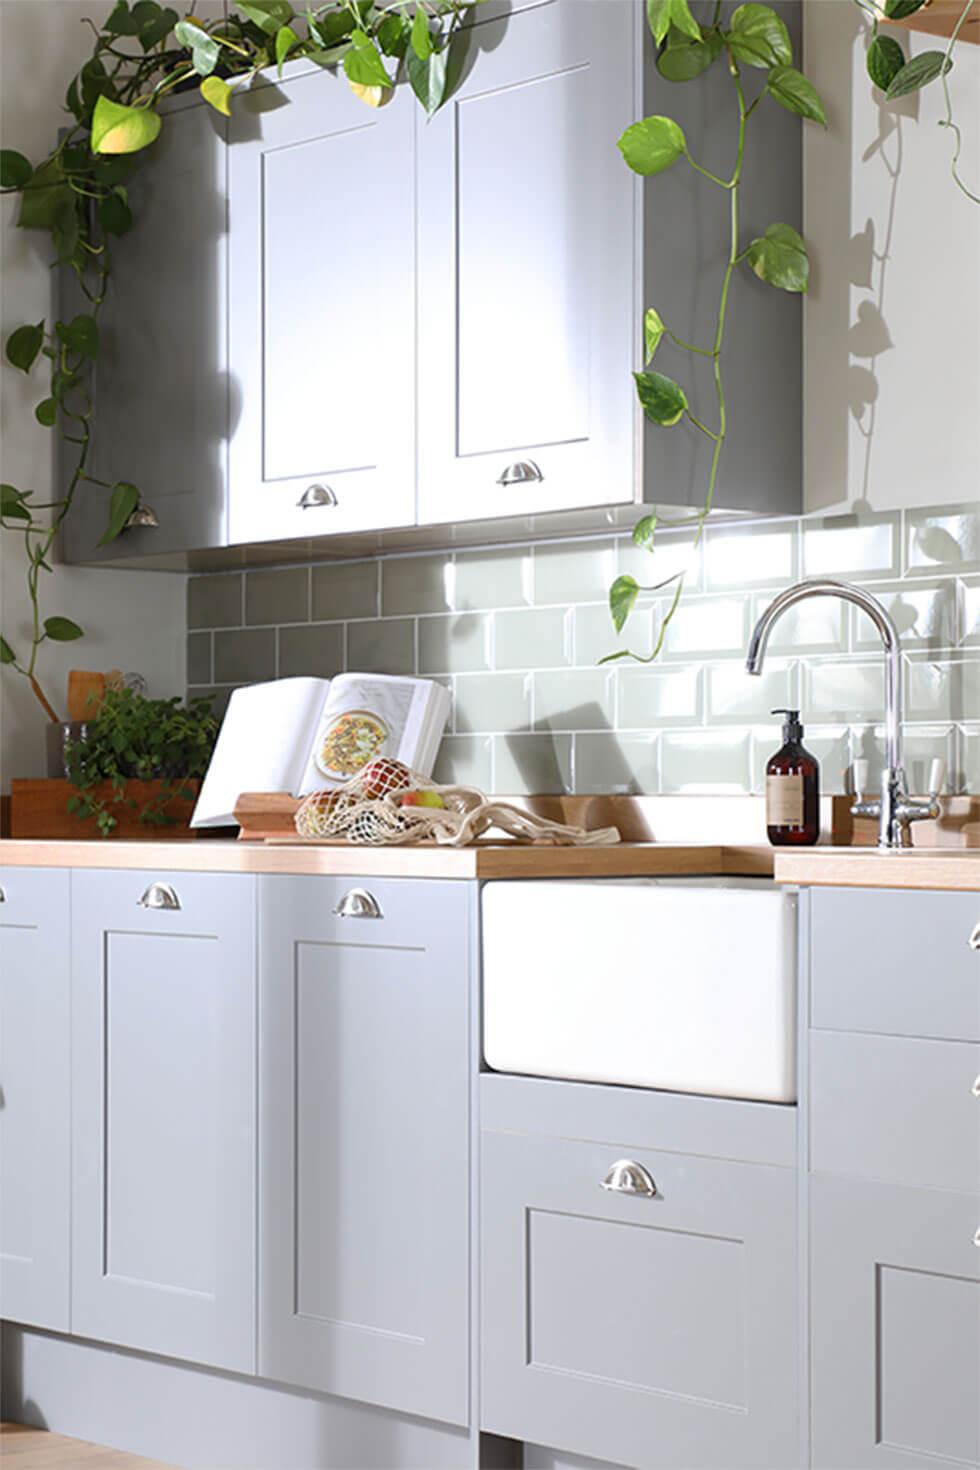 Trailing plants in a light grey kitchen in an eco-friendly home